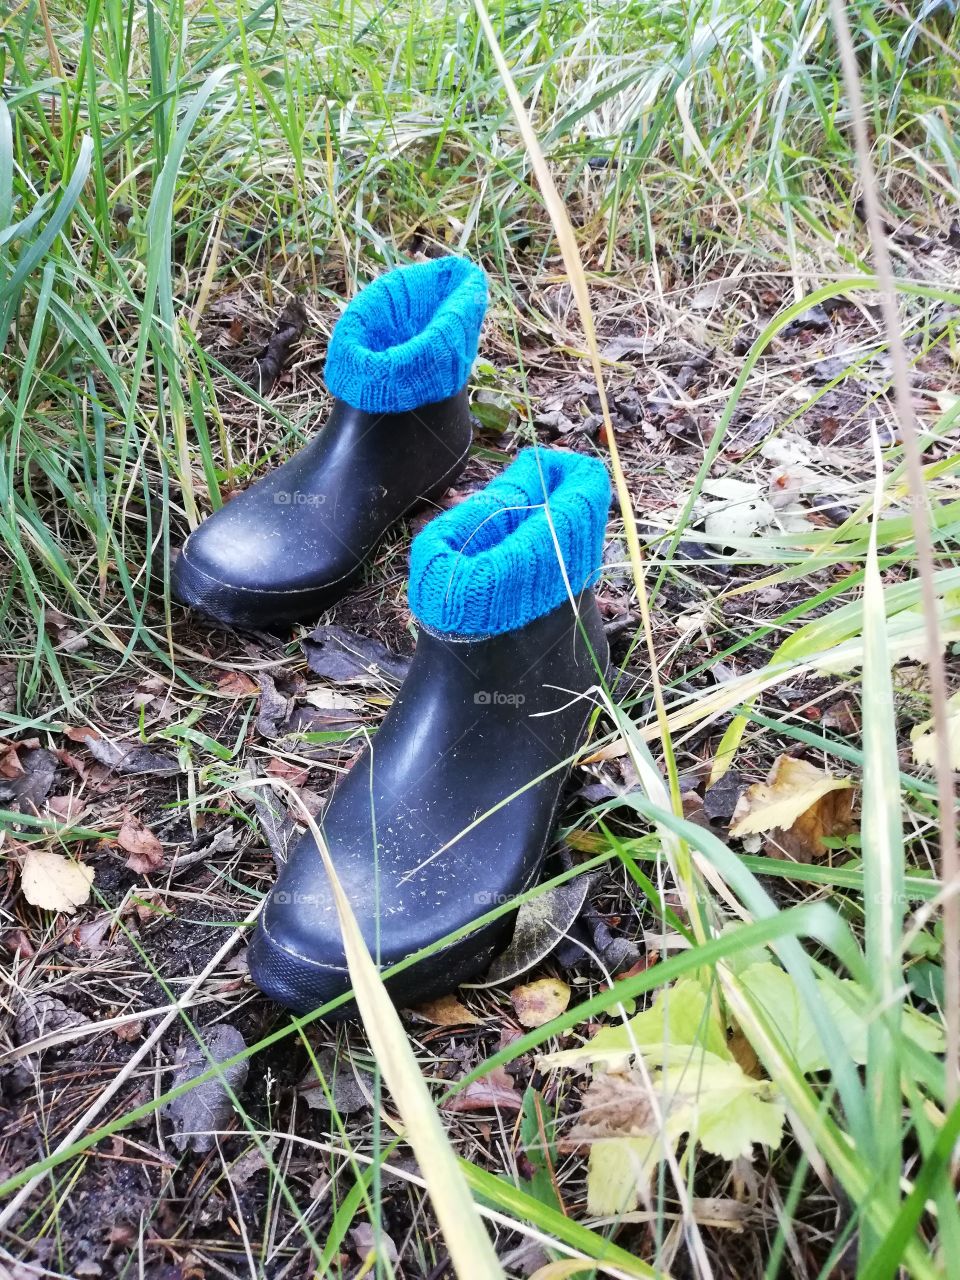 The black old fixed wellies along a path. The turquoise raised decorated woolen stockings, which edges turned on the shoes, which surfaces are dirty. Dry, fallen leaves of Autumn on the ground.